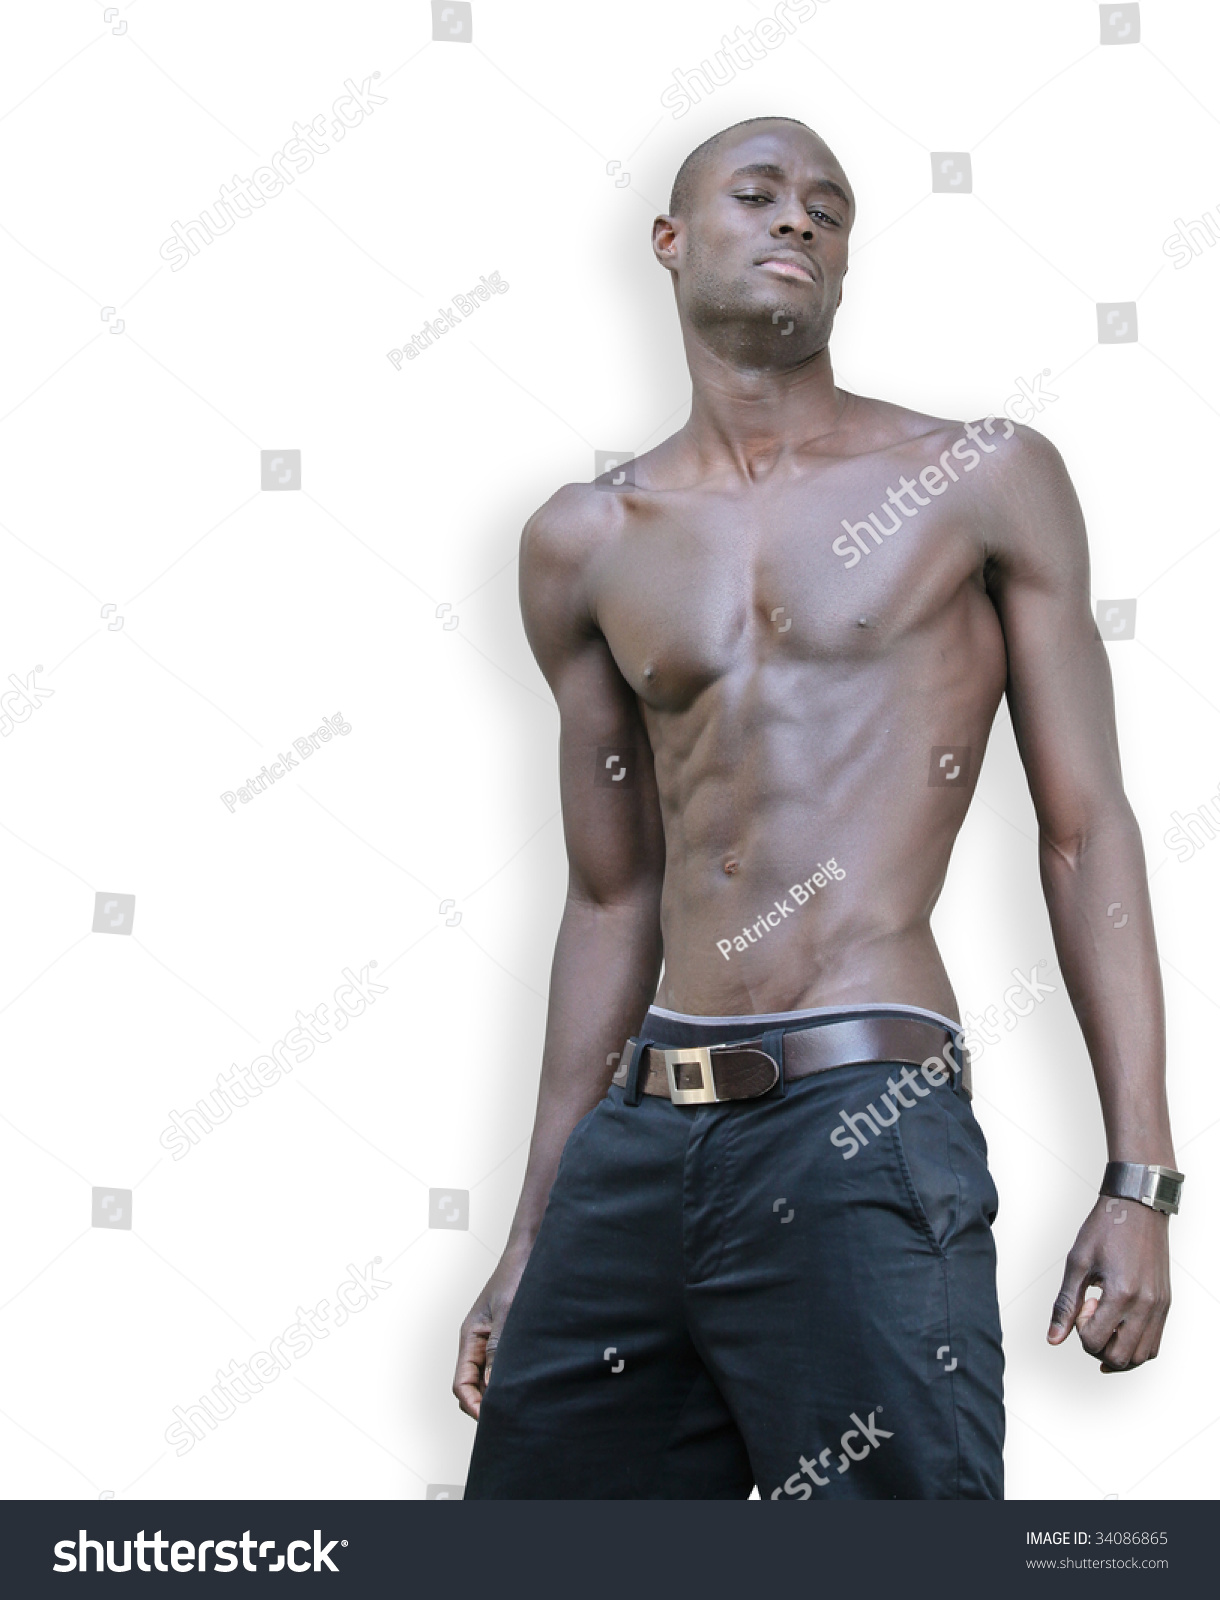 Shirtless Black Young Adult Showing His Stock Photo 34086865 - Shutterstock